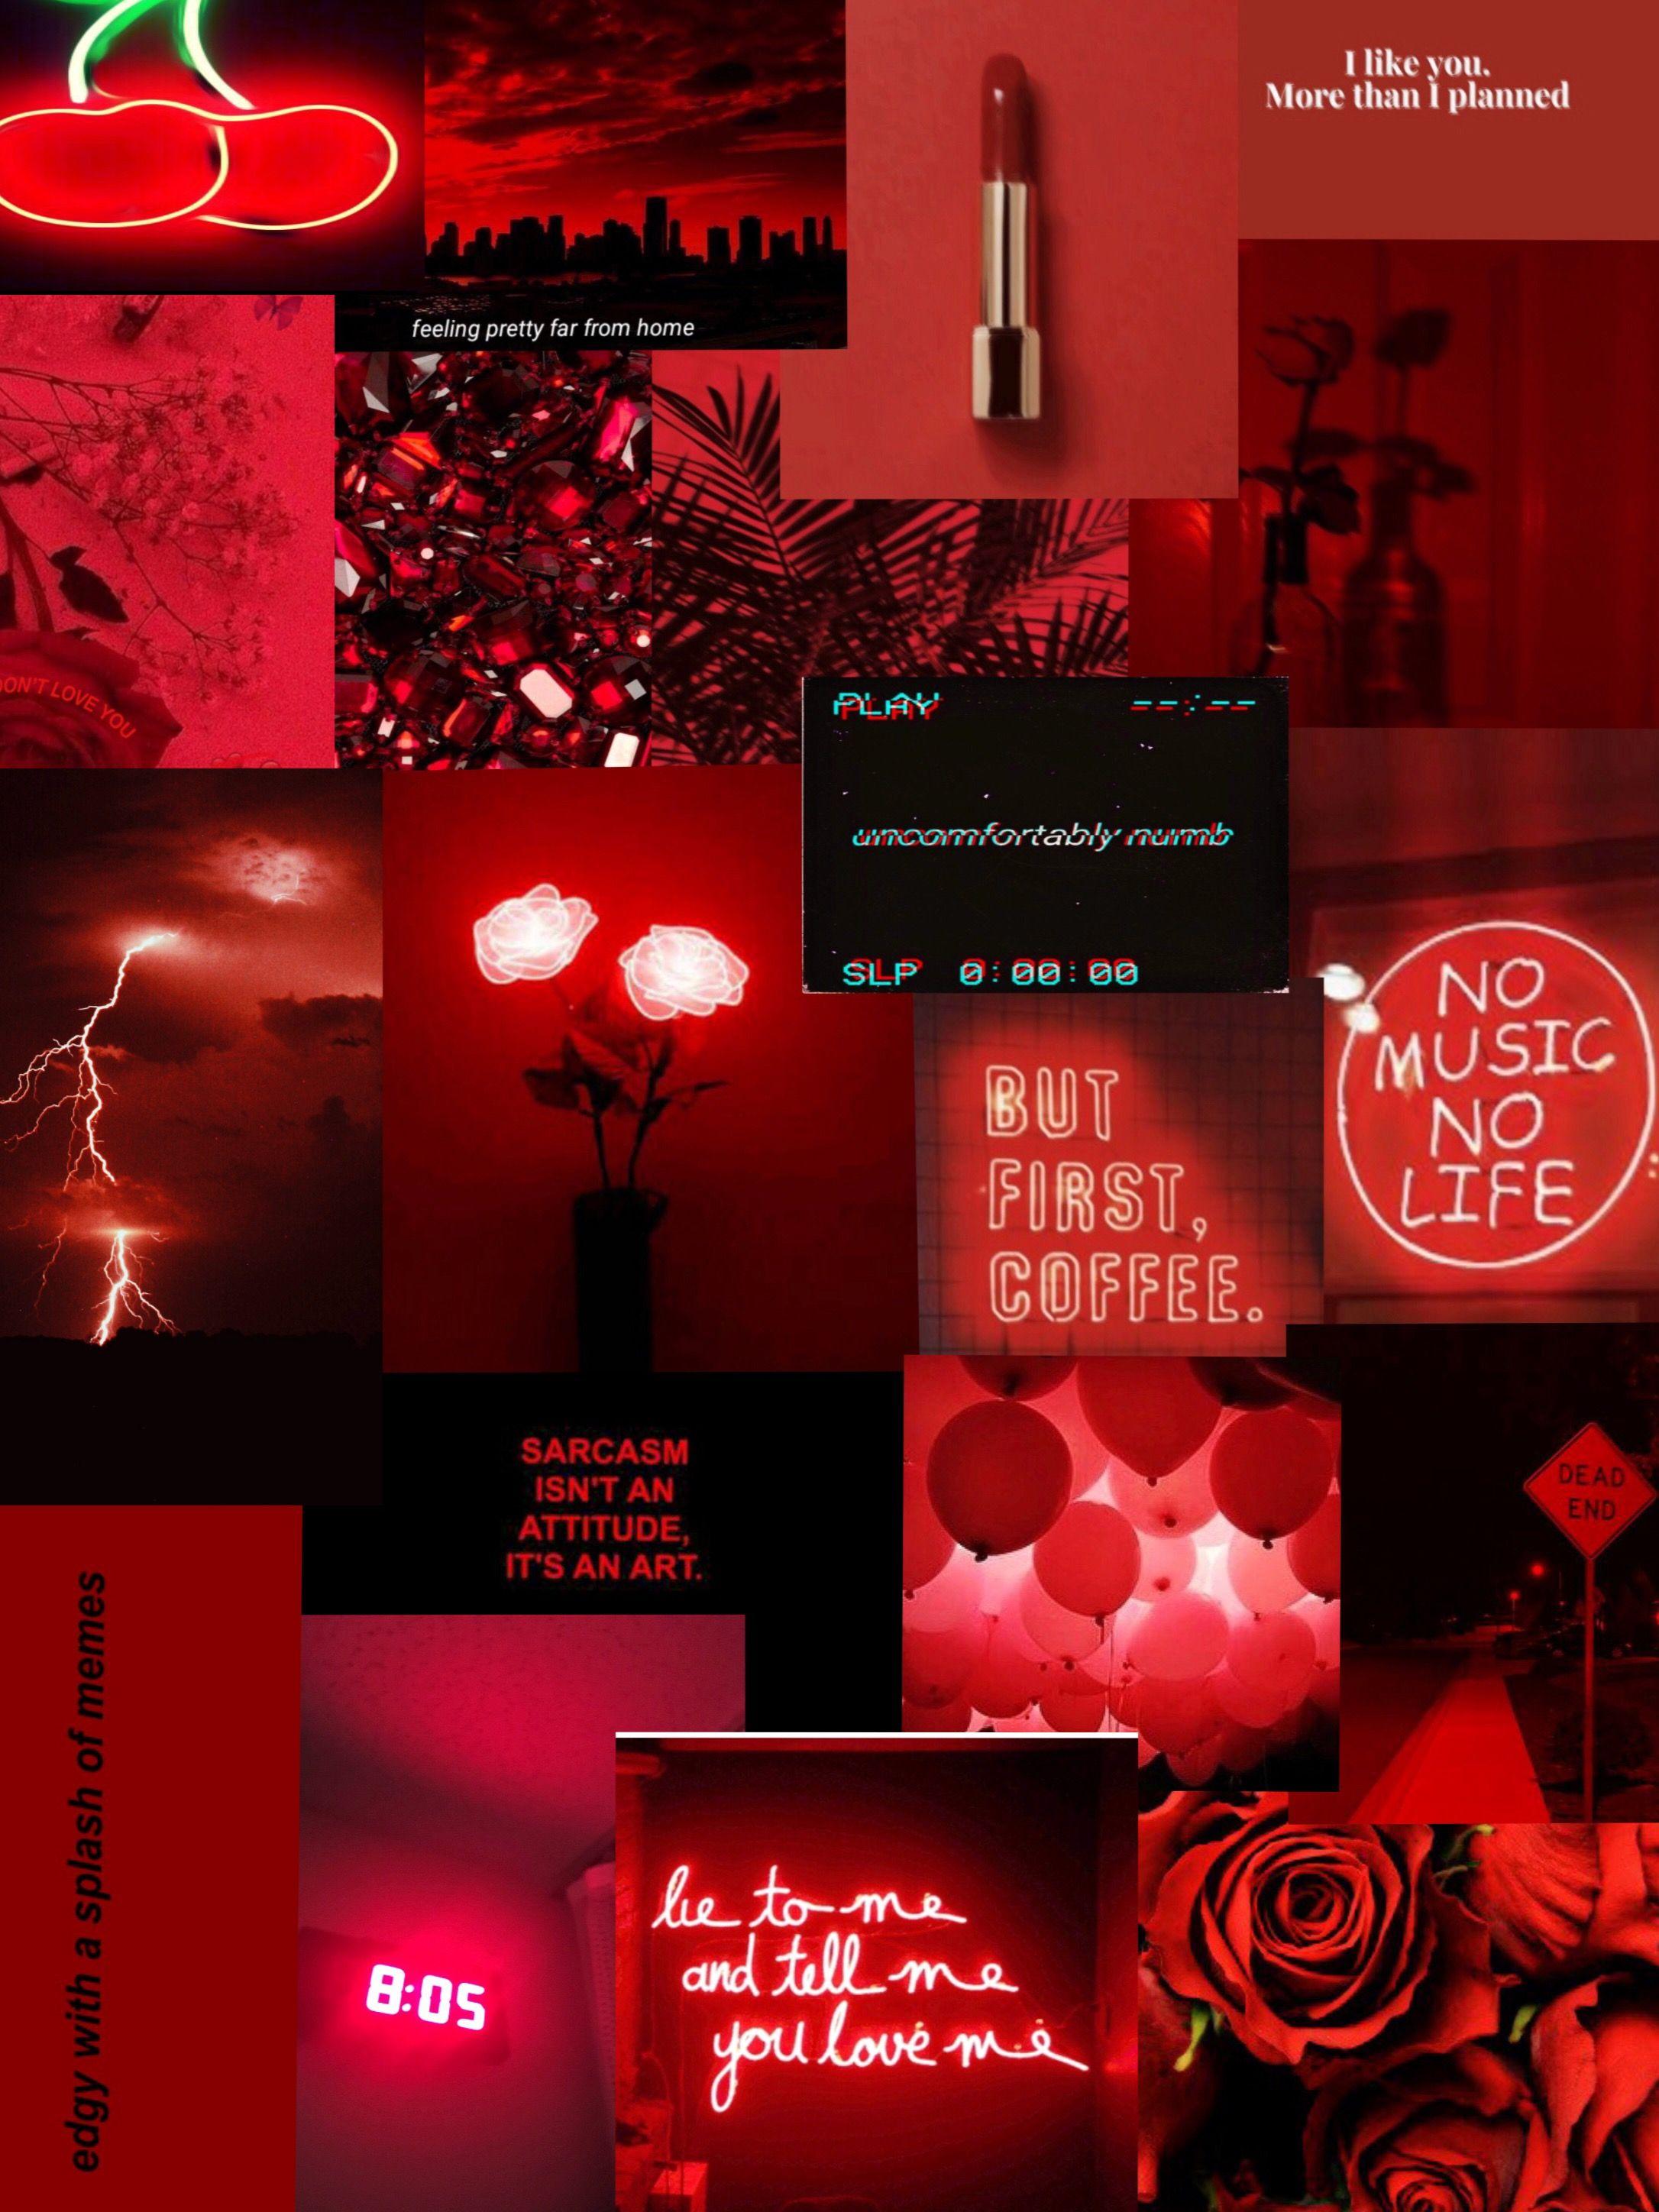 Aesthetic red collage with text that says 